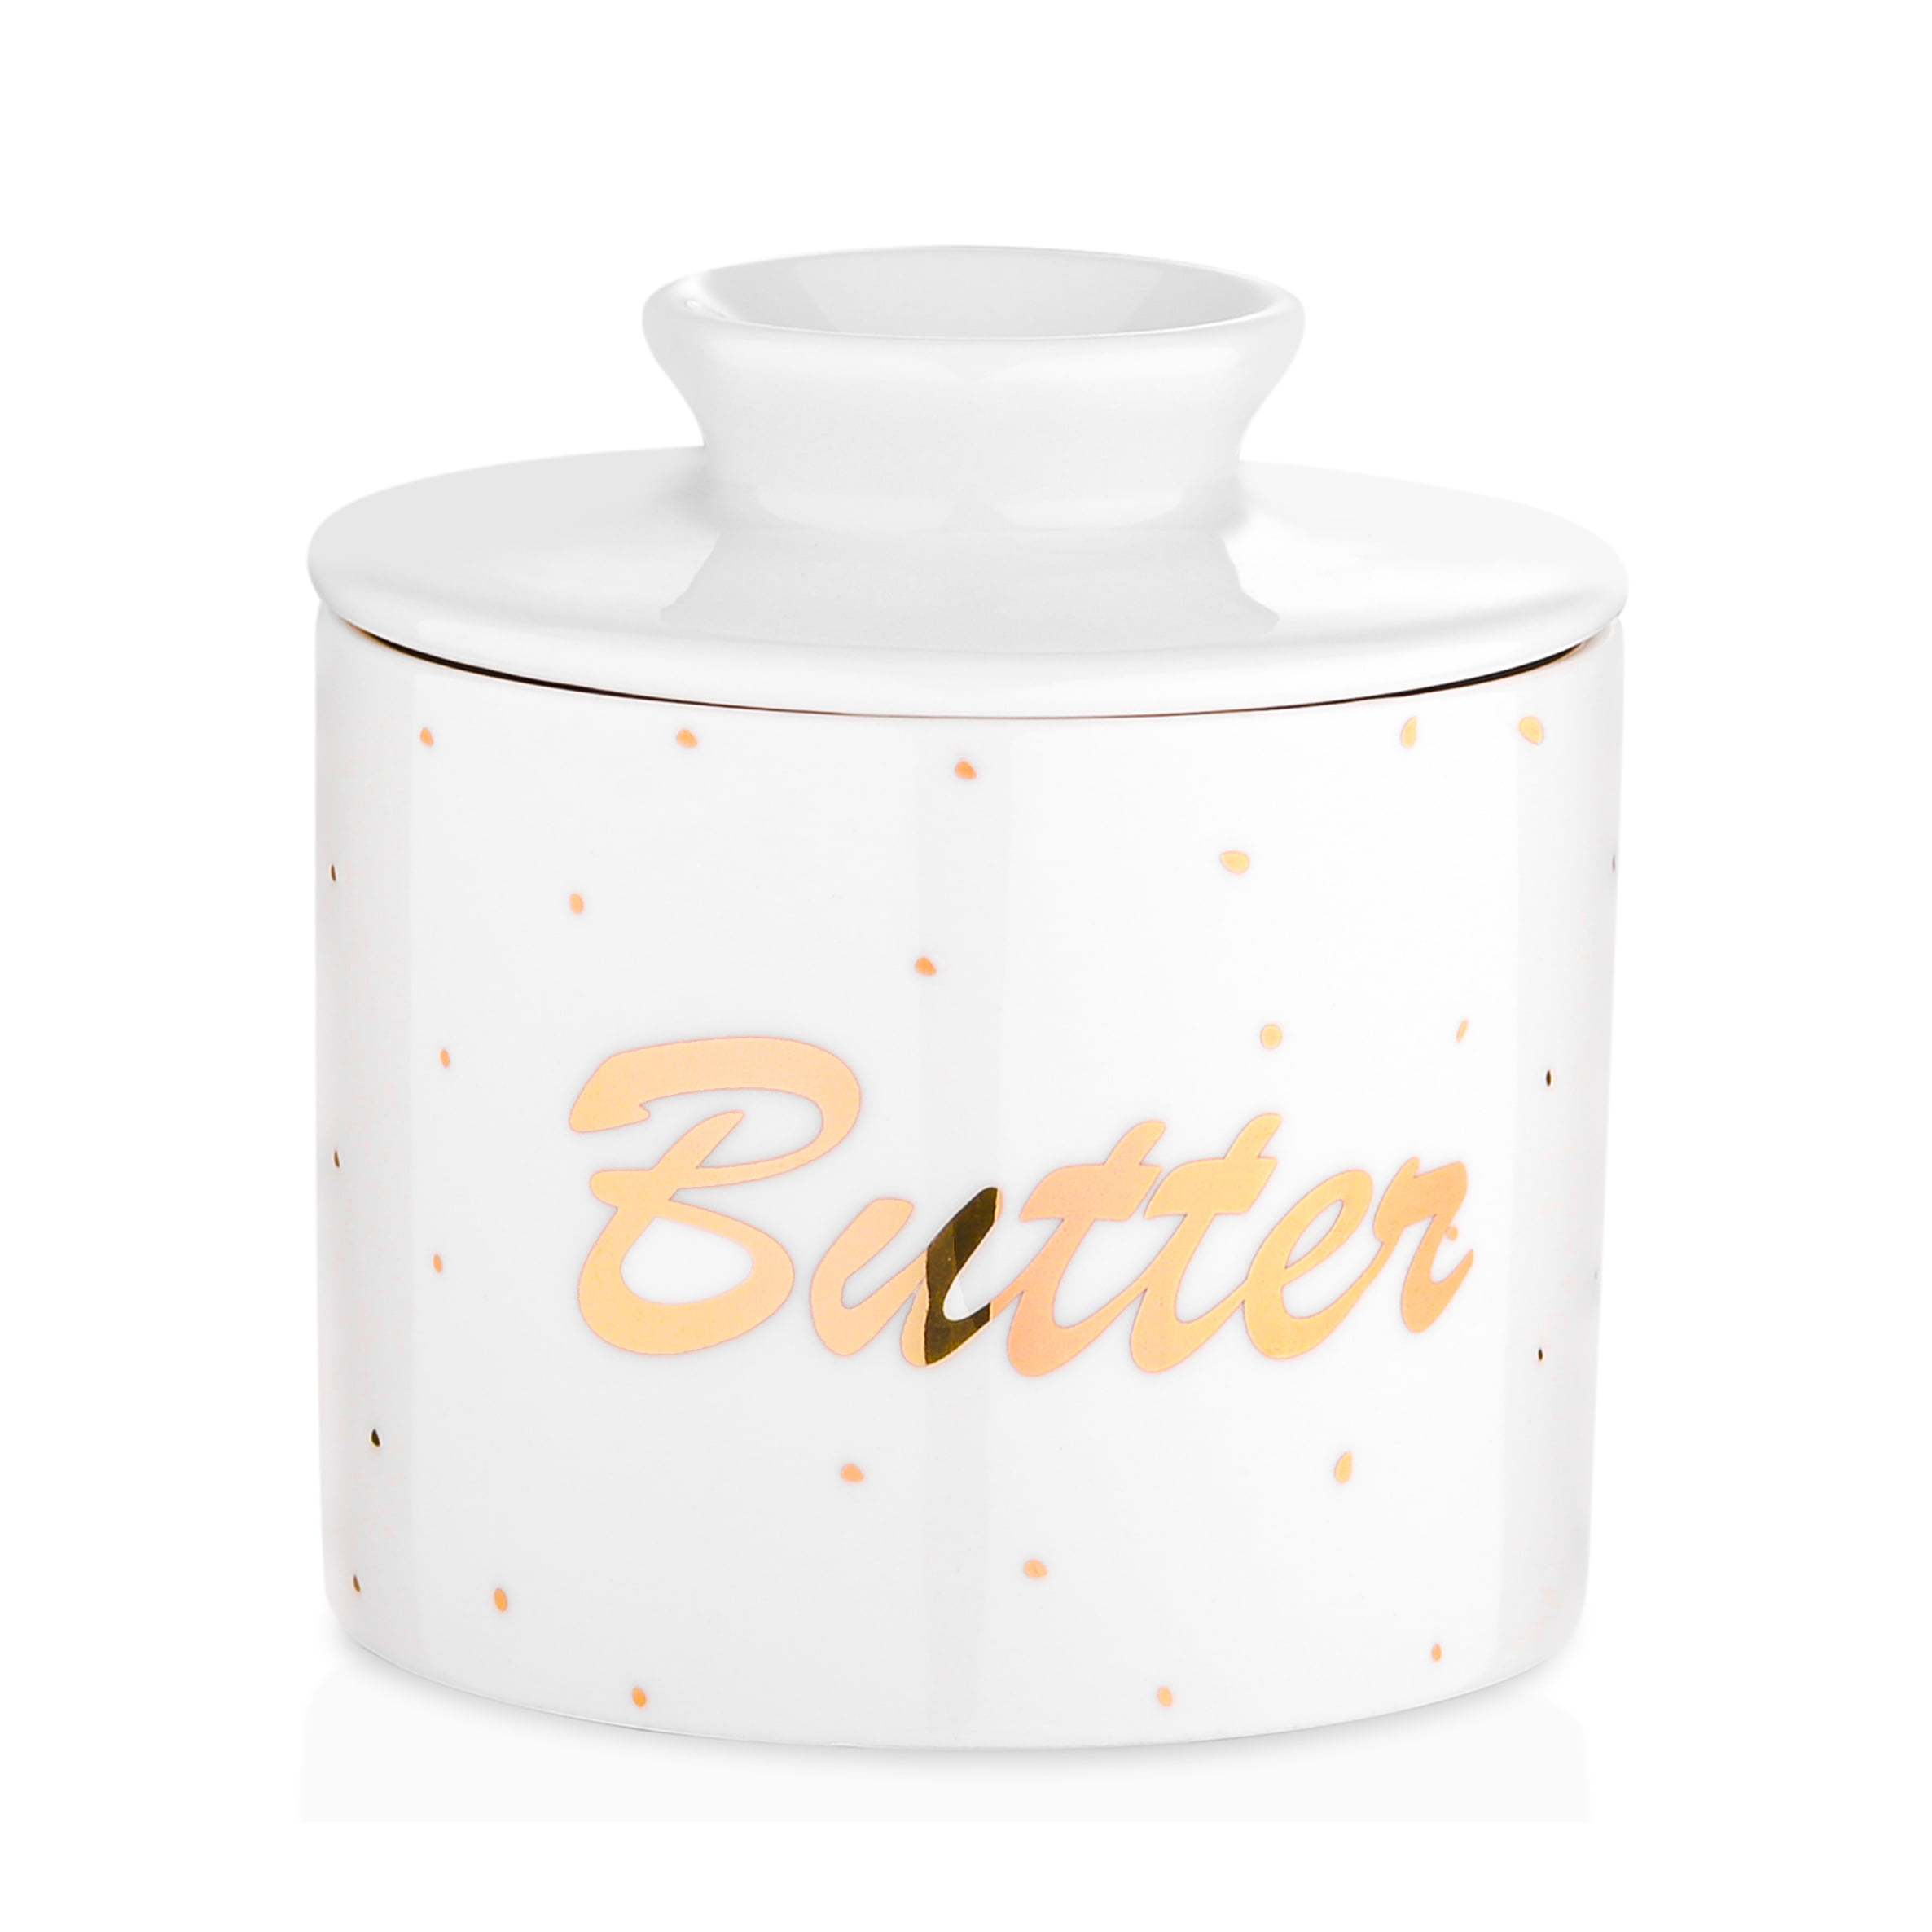 Perfect for East/West Butter LOVECASA Porcelain Butter Keeper Crock Mess Free Butter Keeper for Countertop Airtight Large French Butter Dish with Lid Gold 